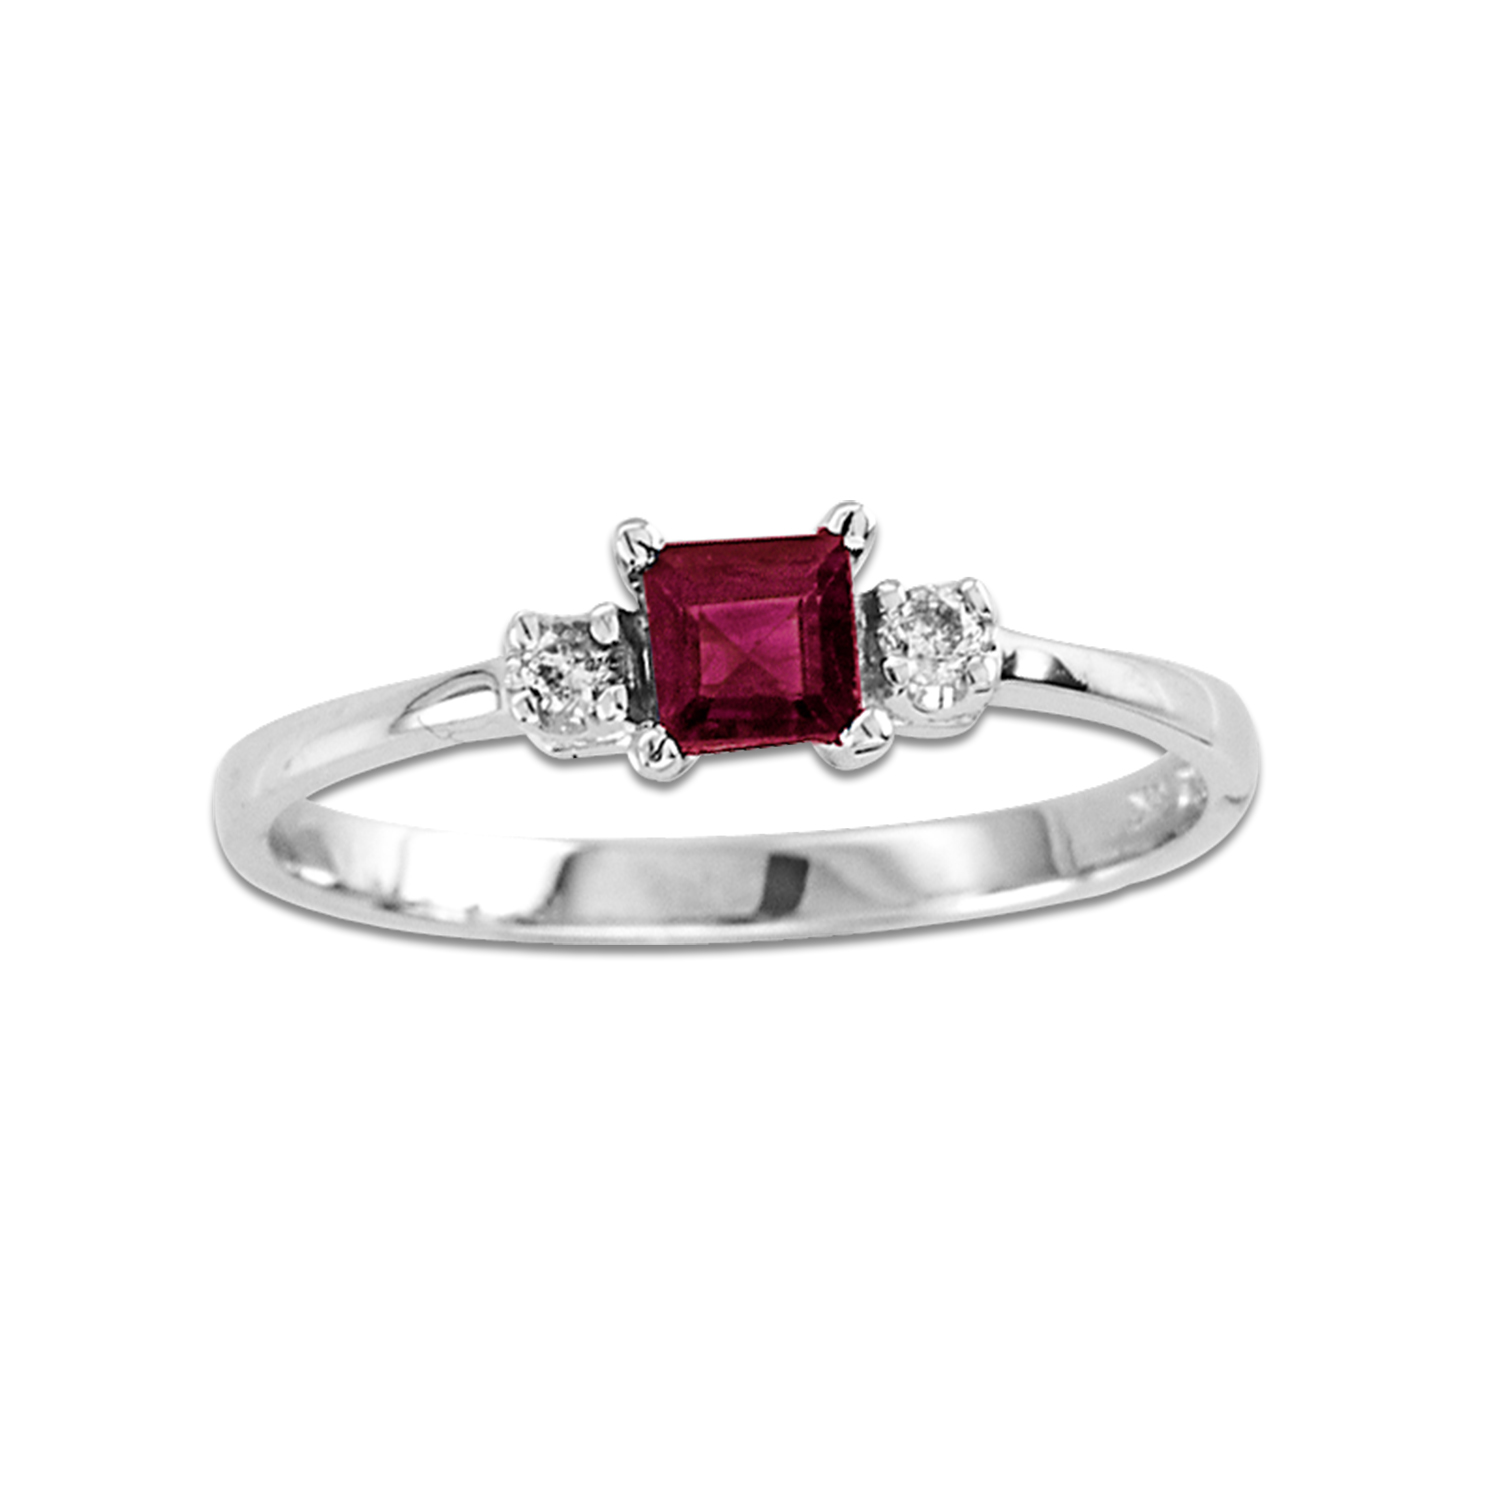 0.04ctw Diamond and Ruby Ring in 14k Gold